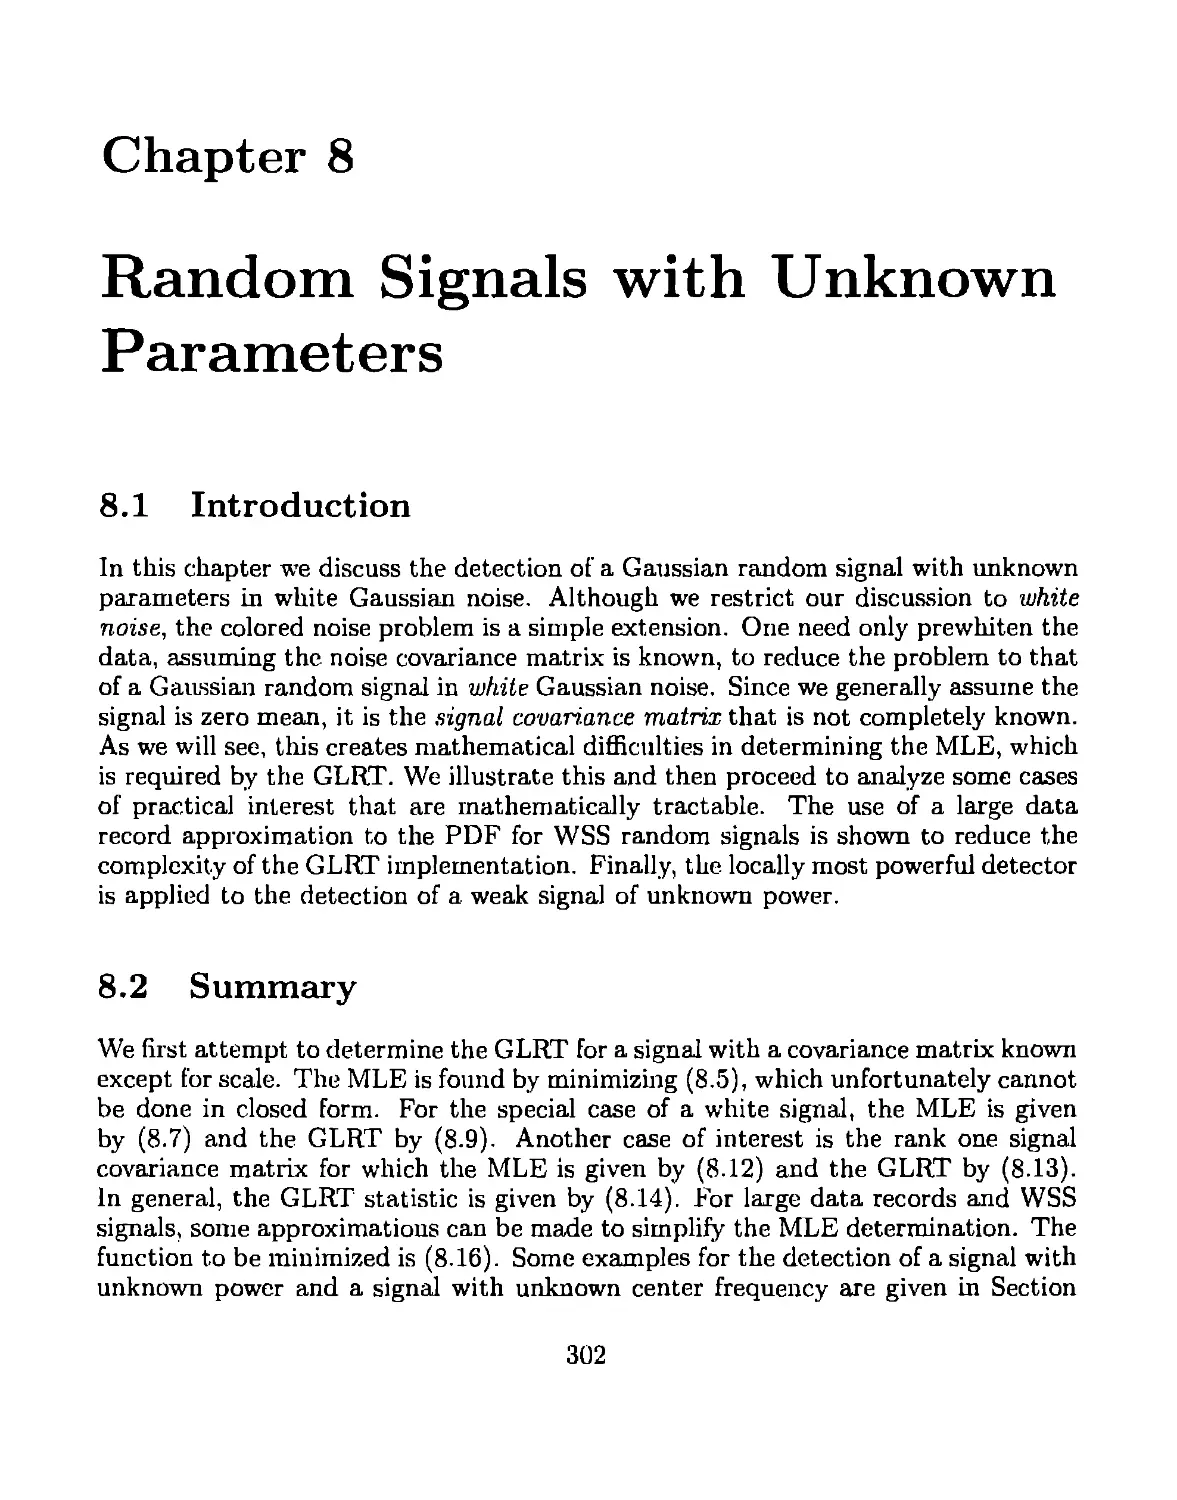 8 Random Signals with Unknown Parameters
8.2 Summary